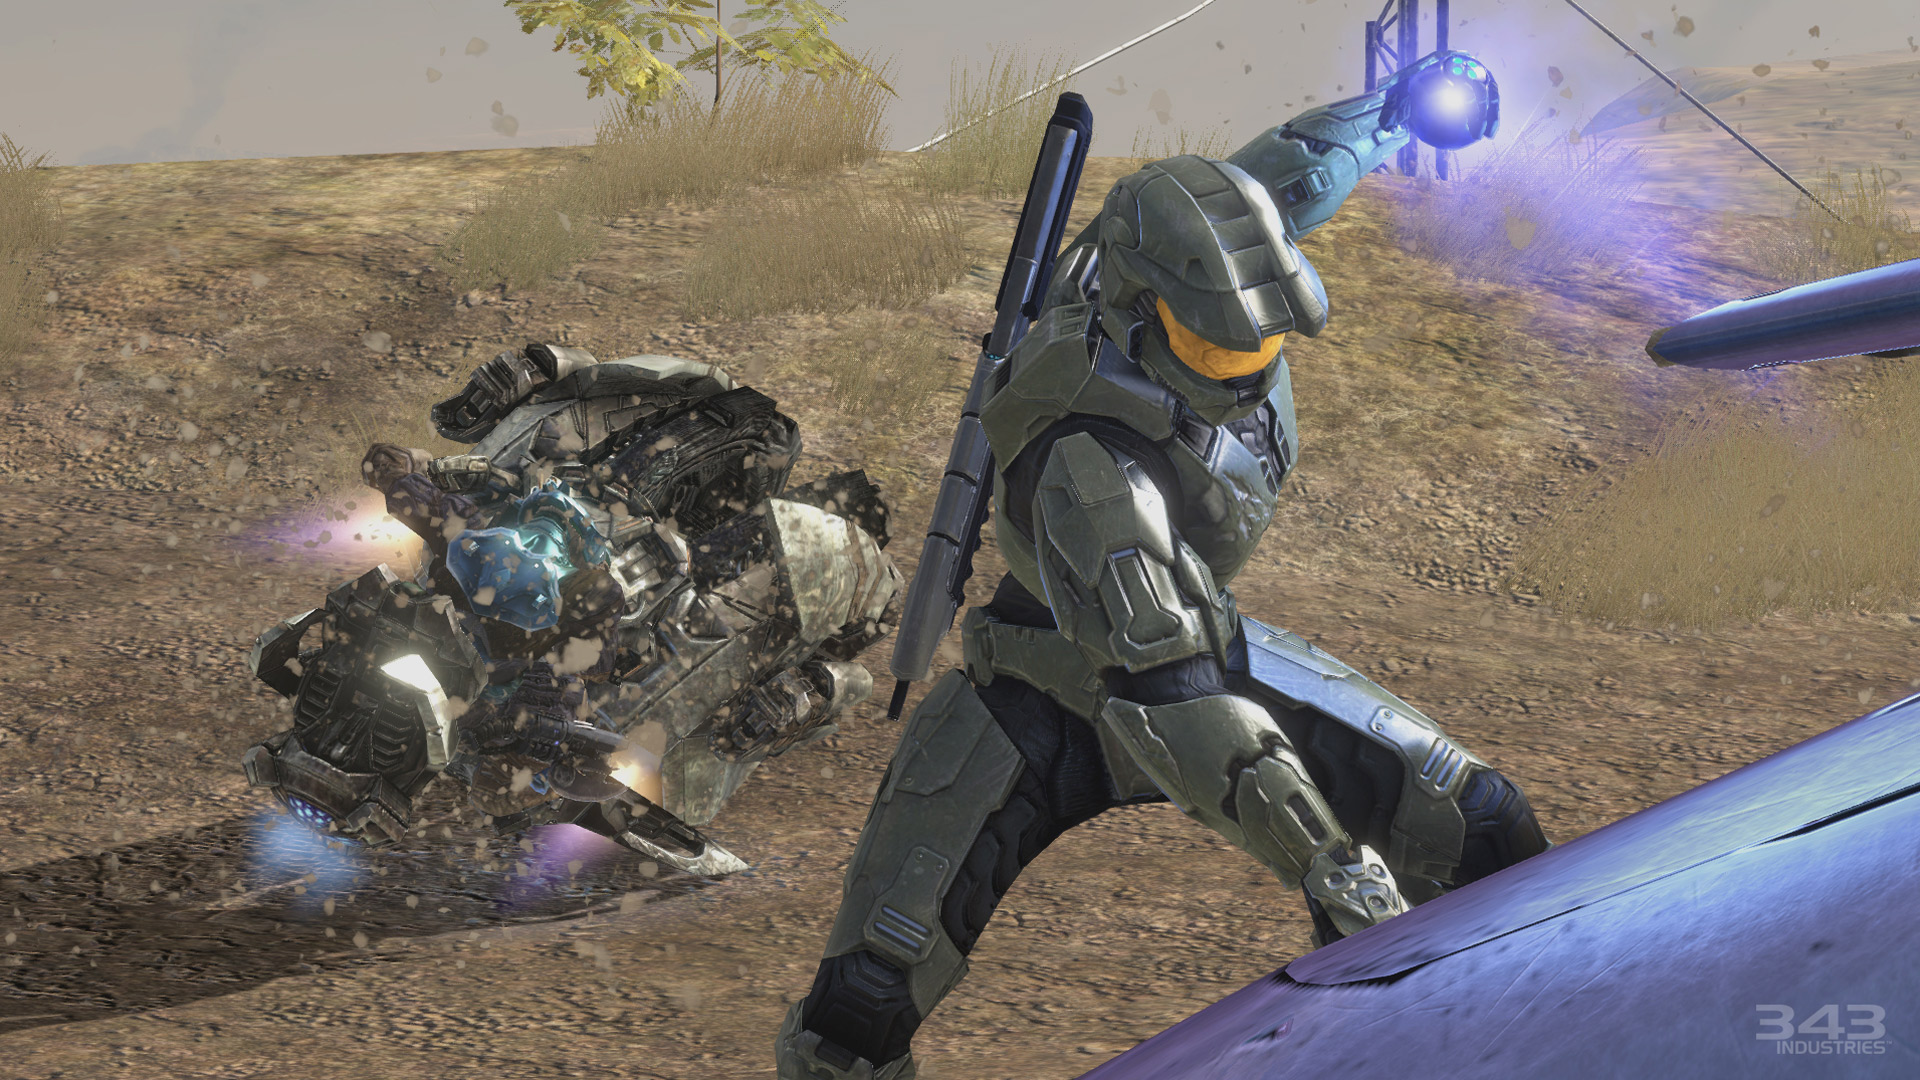 Halo: The Master Chief Collection Is More Than Just A Nostalgia Trip